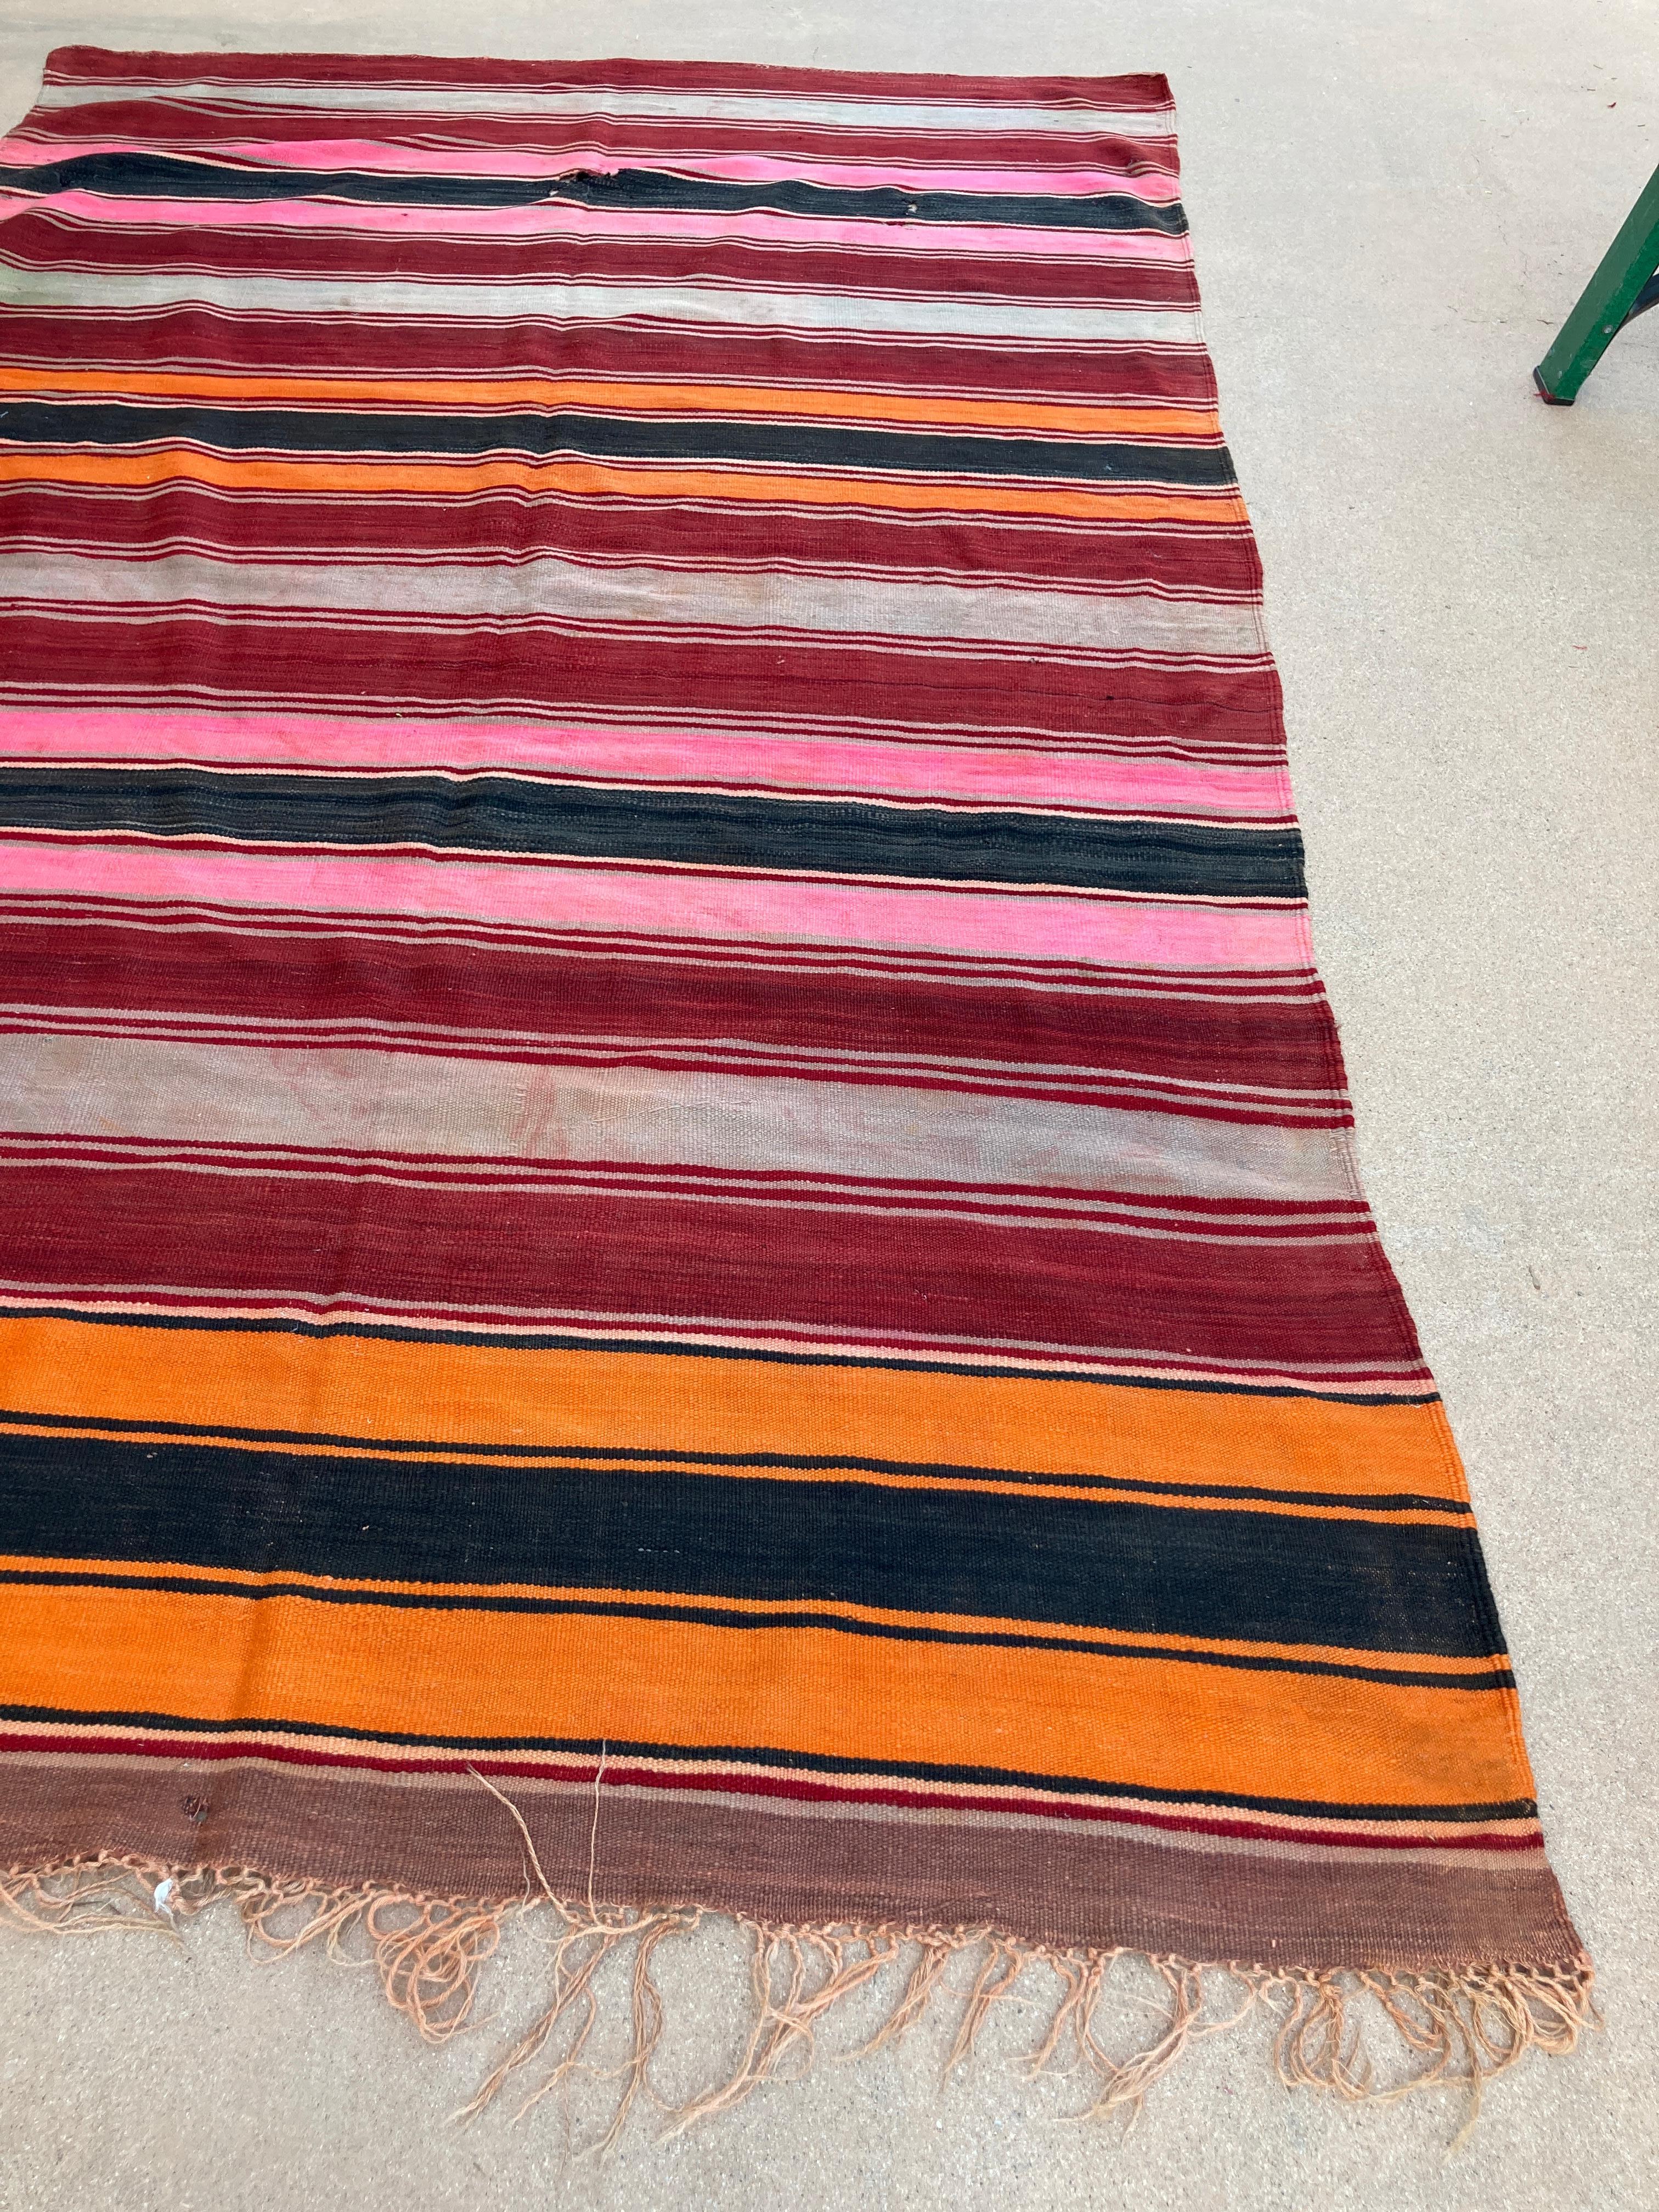 Moroccan Vintage Flat-Weave Stripe Kilim Rug In Fair Condition For Sale In North Hollywood, CA